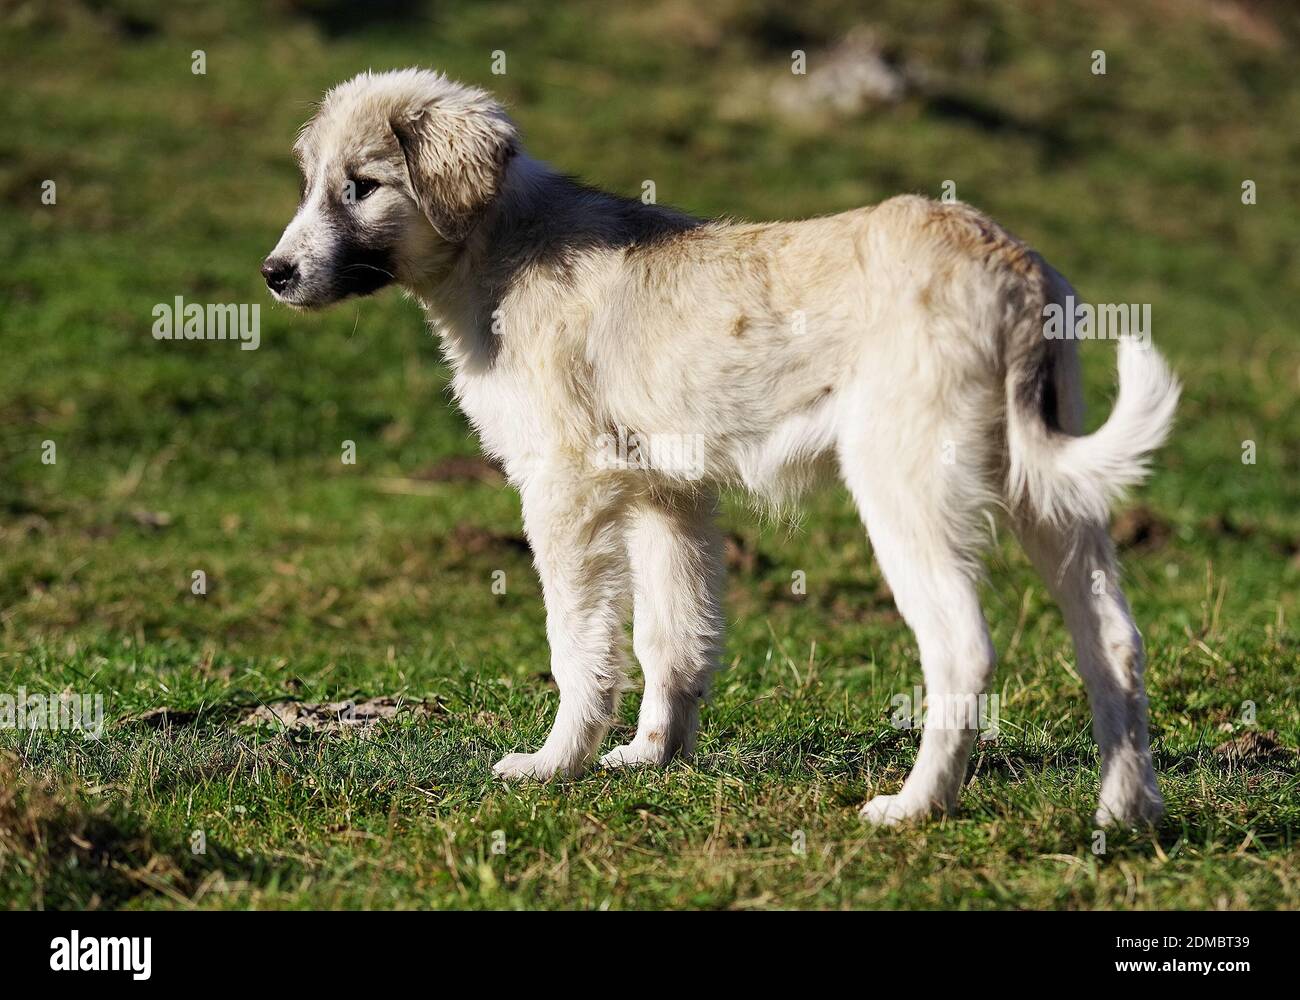 Dog On Grassy Field During Sunny Day Stock Photo